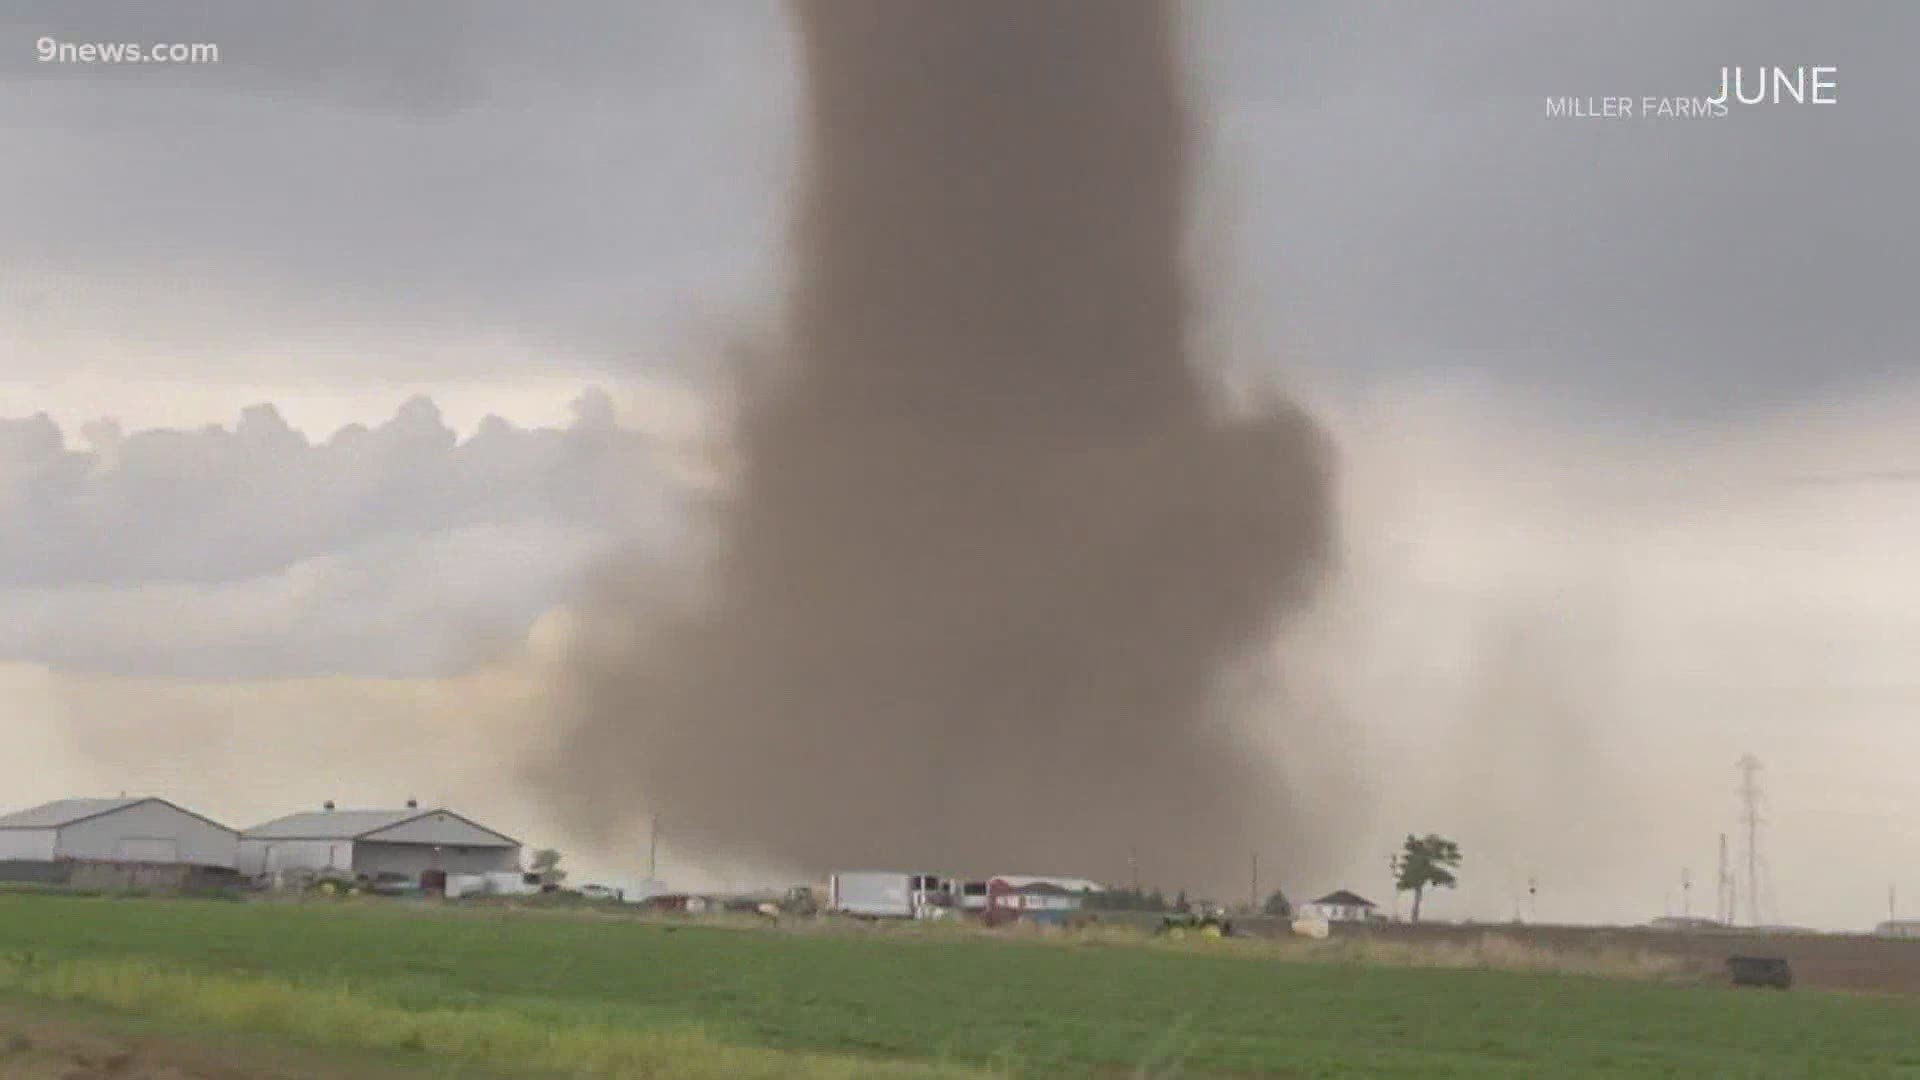 The Platteville-based farm sustained damage to equipment and crops during the June landspout tornado.